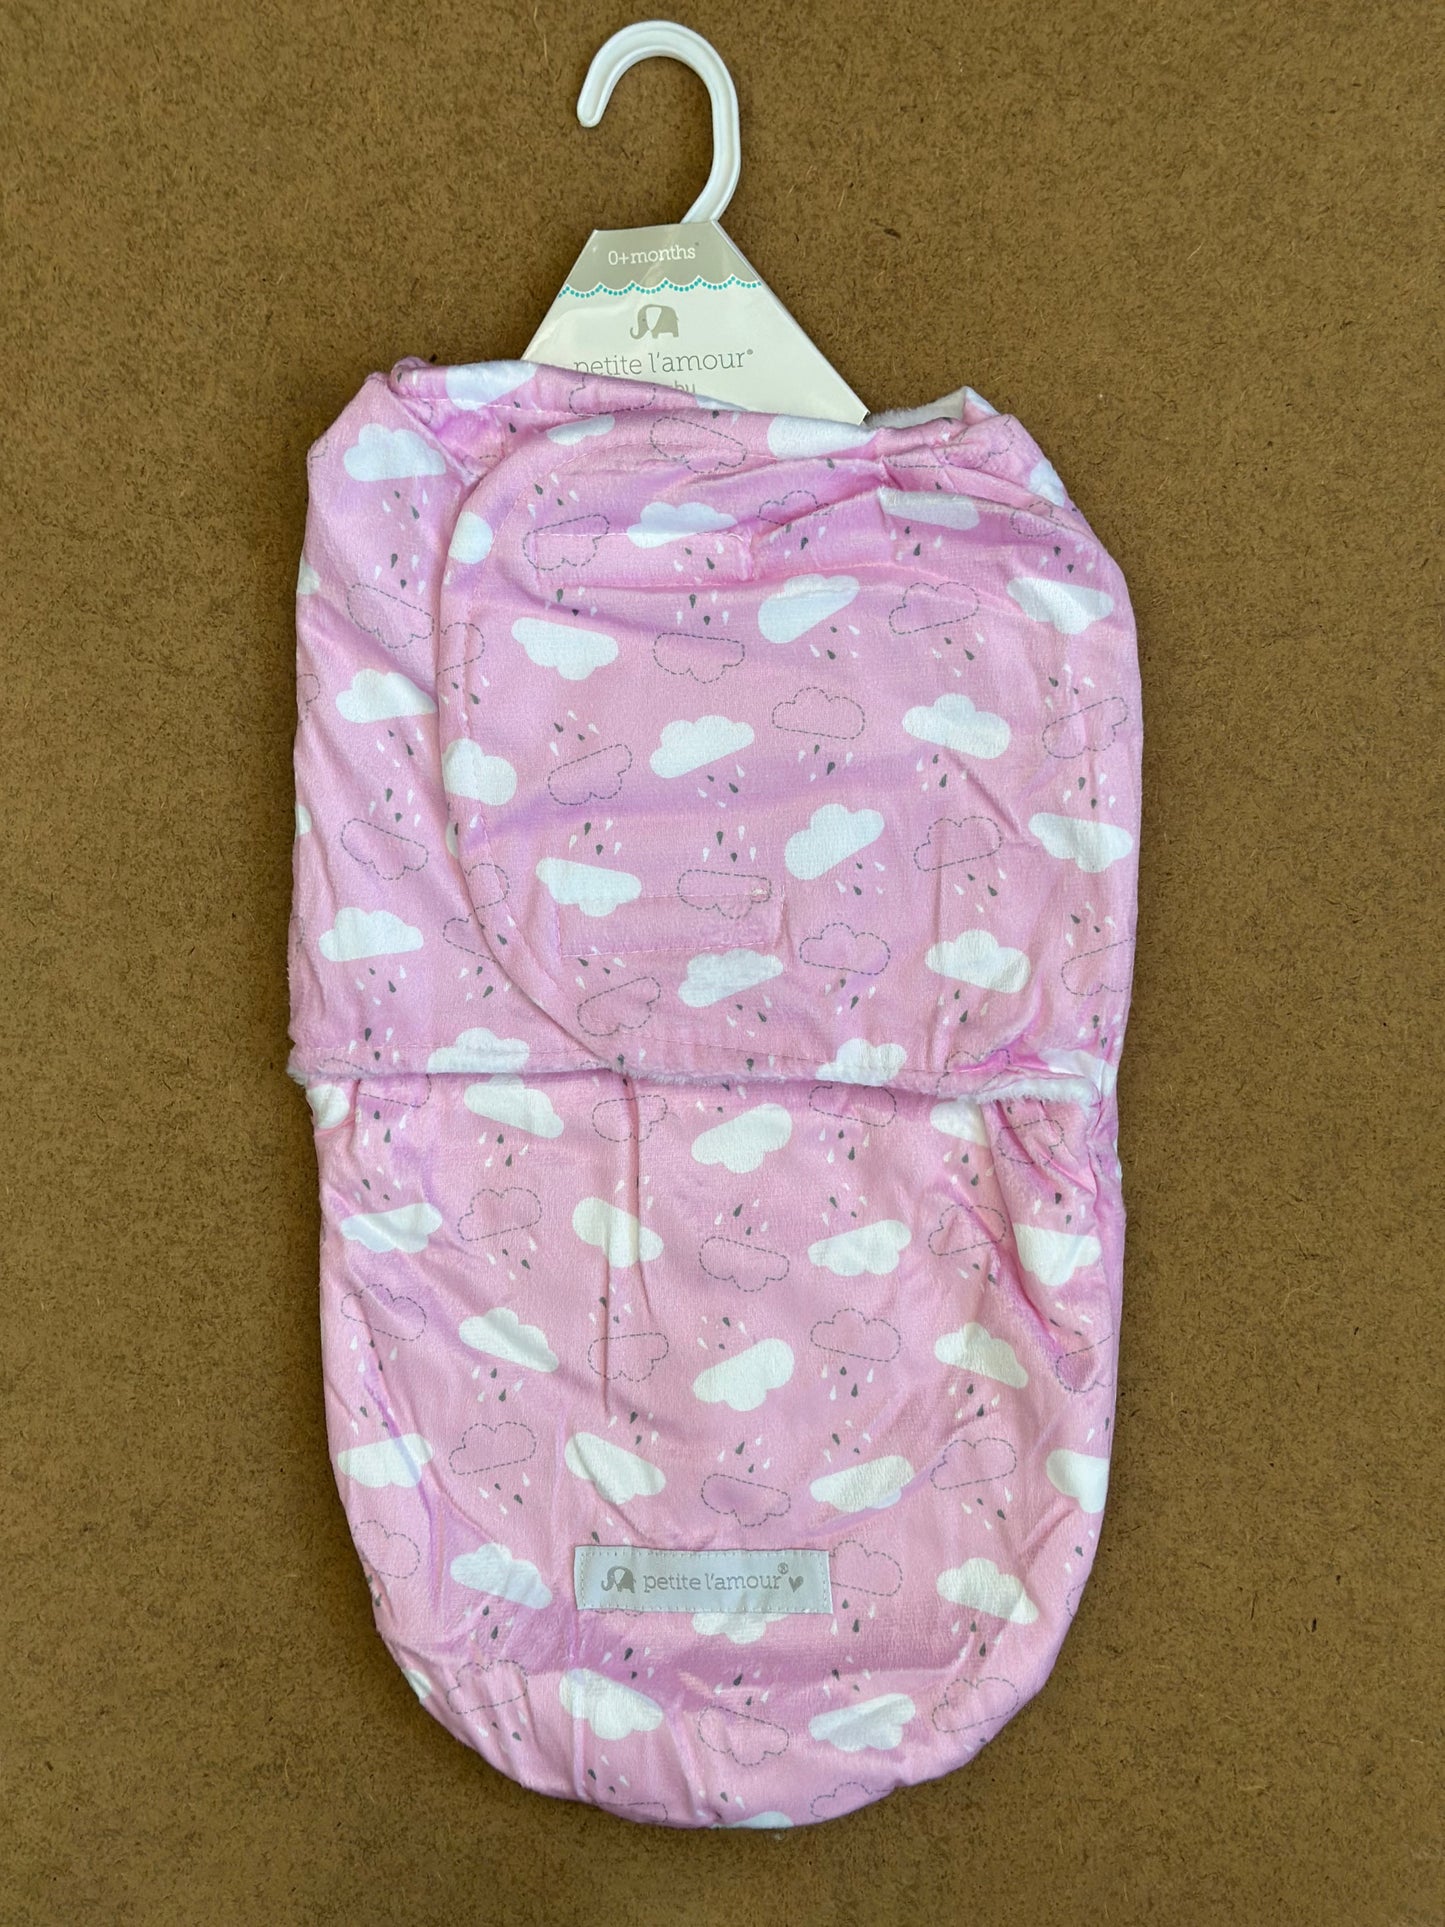 Adjustable Cloudy Sherpa-Lined Winter Swaddle by Little Sparks (Pink)